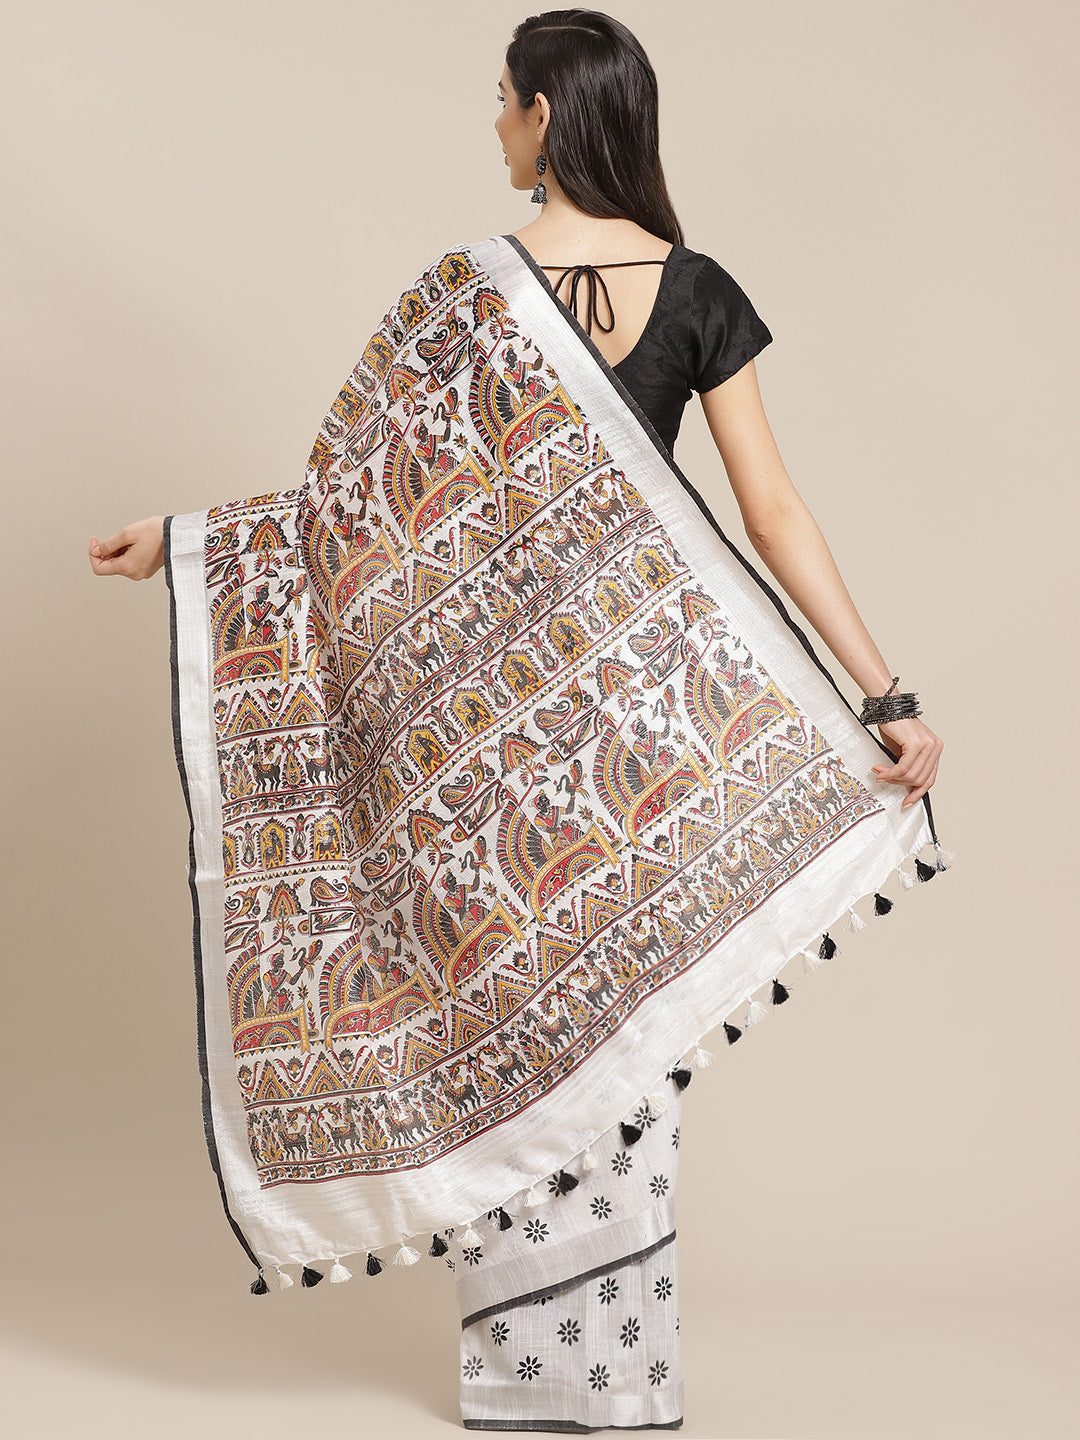 White and Red, Kalakari India Bhagalpuri Linen Blend Woven Design Saree with Blouse ALBGSA0140-Saree-Kalakari India-ALBGSA0140-Cotton, Geographical Indication, Hand Crafted, Heritage Prints, Linen, Natural Dyes, Red, Sarees, Shibori, Sustainable Fabrics, Woven, Yellow-[Linen,Ethnic,wear,Fashionista,Handloom,Handicraft,Indigo,blockprint,block,print,Cotton,Chanderi,Blue, latest,classy,party,bollywood,trendy,summer,style,traditional,formal,elegant,unique,style,hand,block,print, dabu,booti,gift,pres